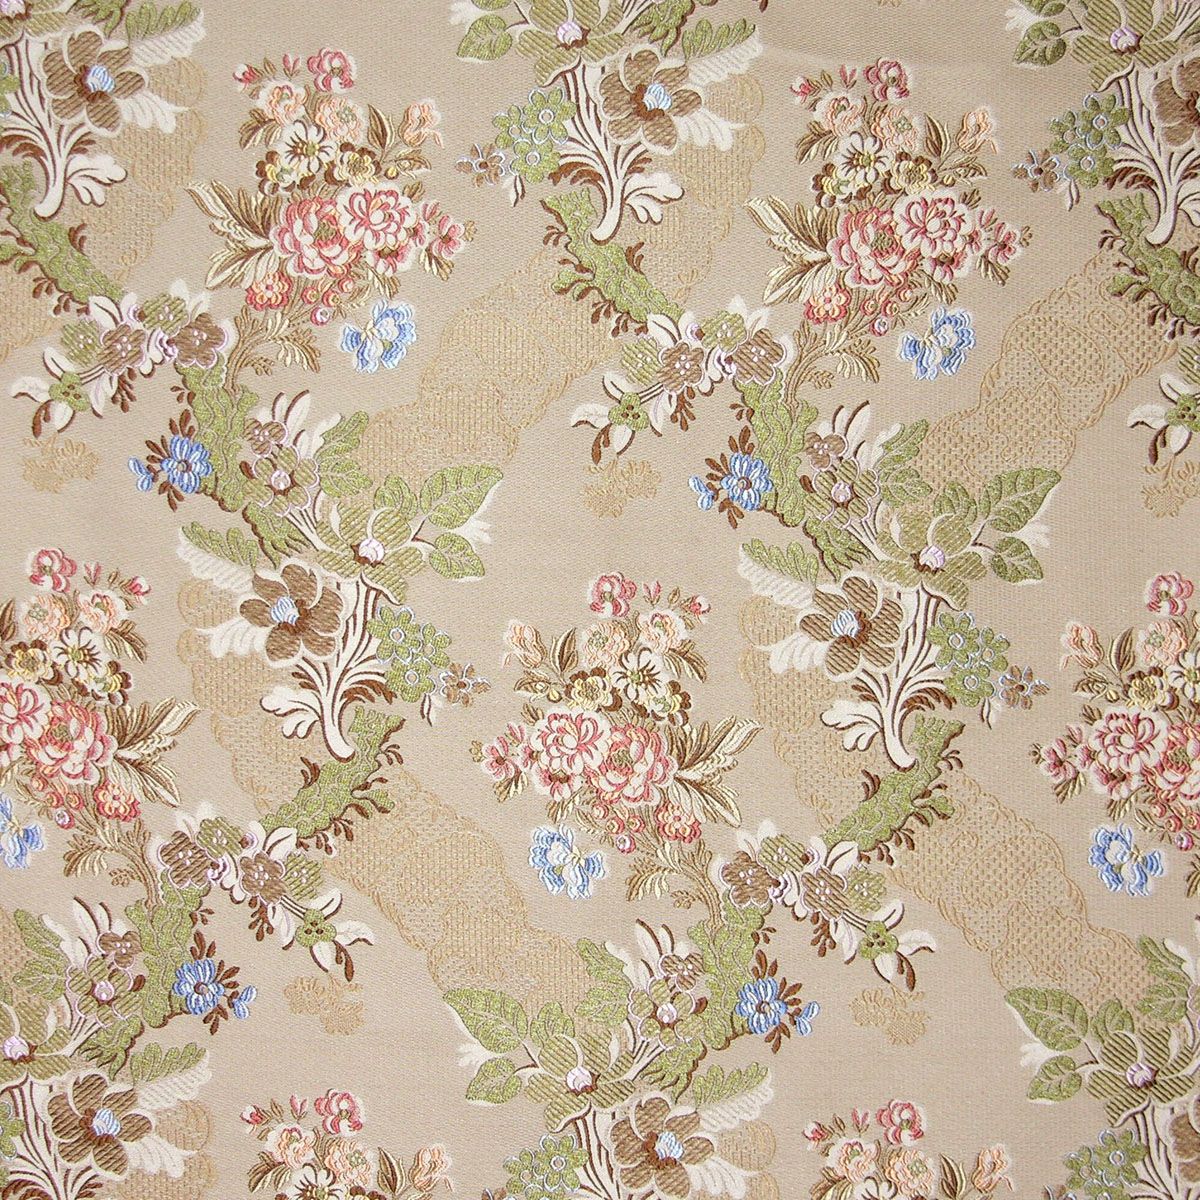 Villa Carlotta fabric in ecru multi color - pattern number SB 00012474 - by Scalamandre in the Old World Weavers collection